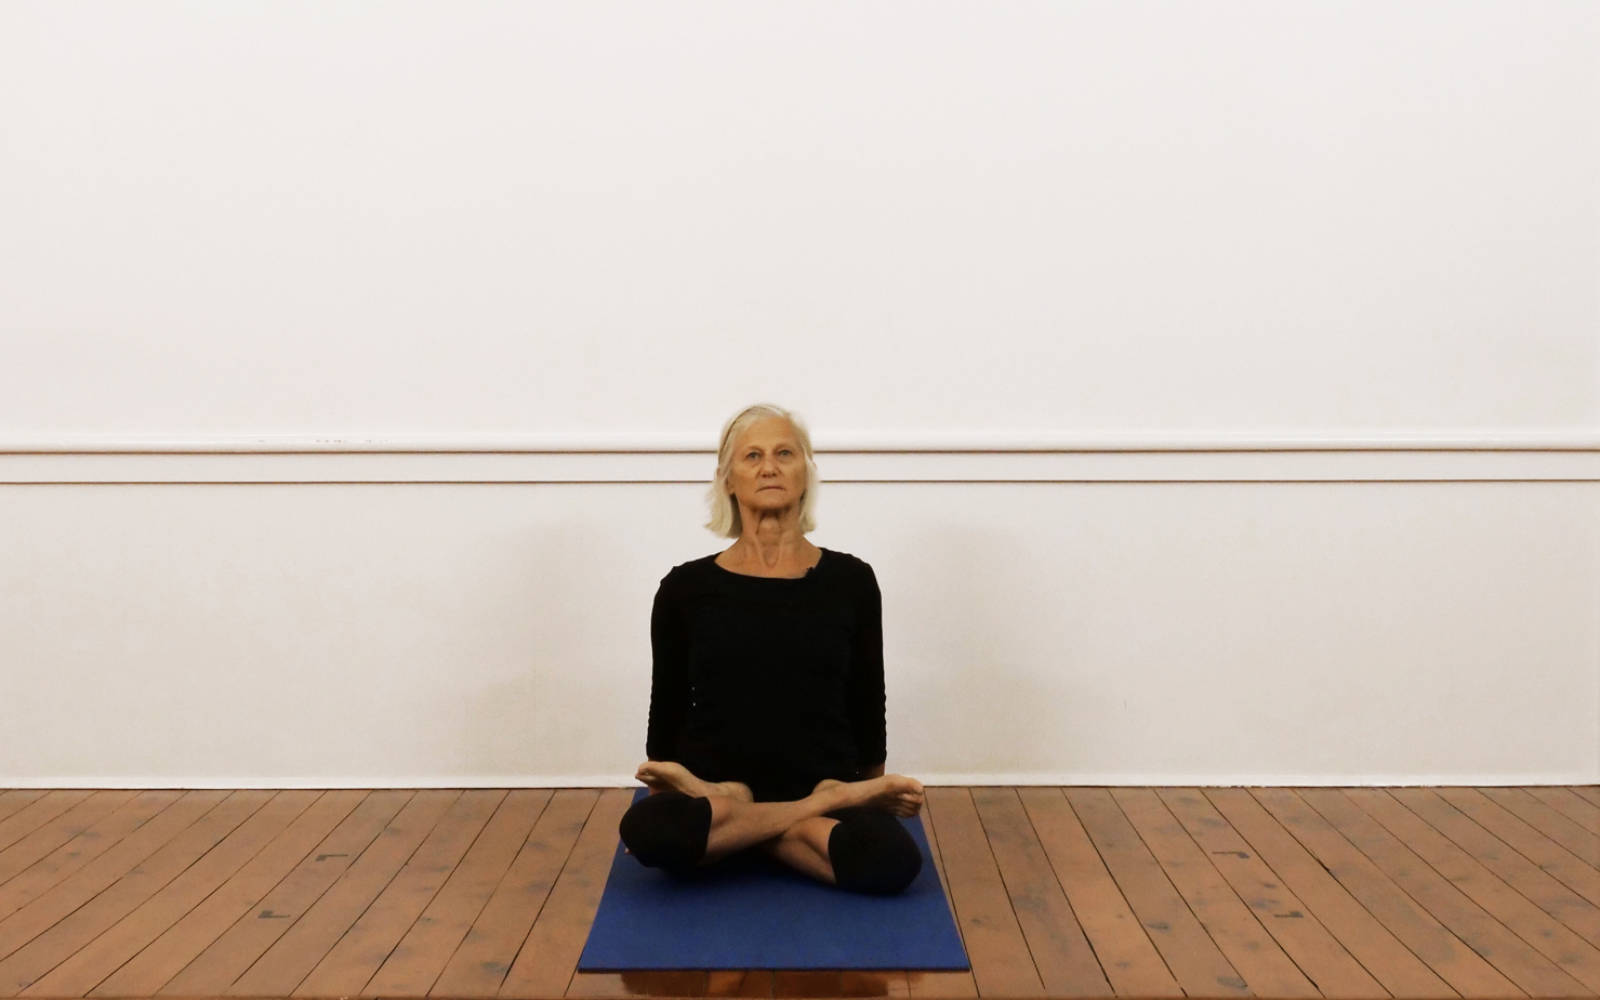 How To Do Padmasana (Lotus Position) And What Are Its Benefits?